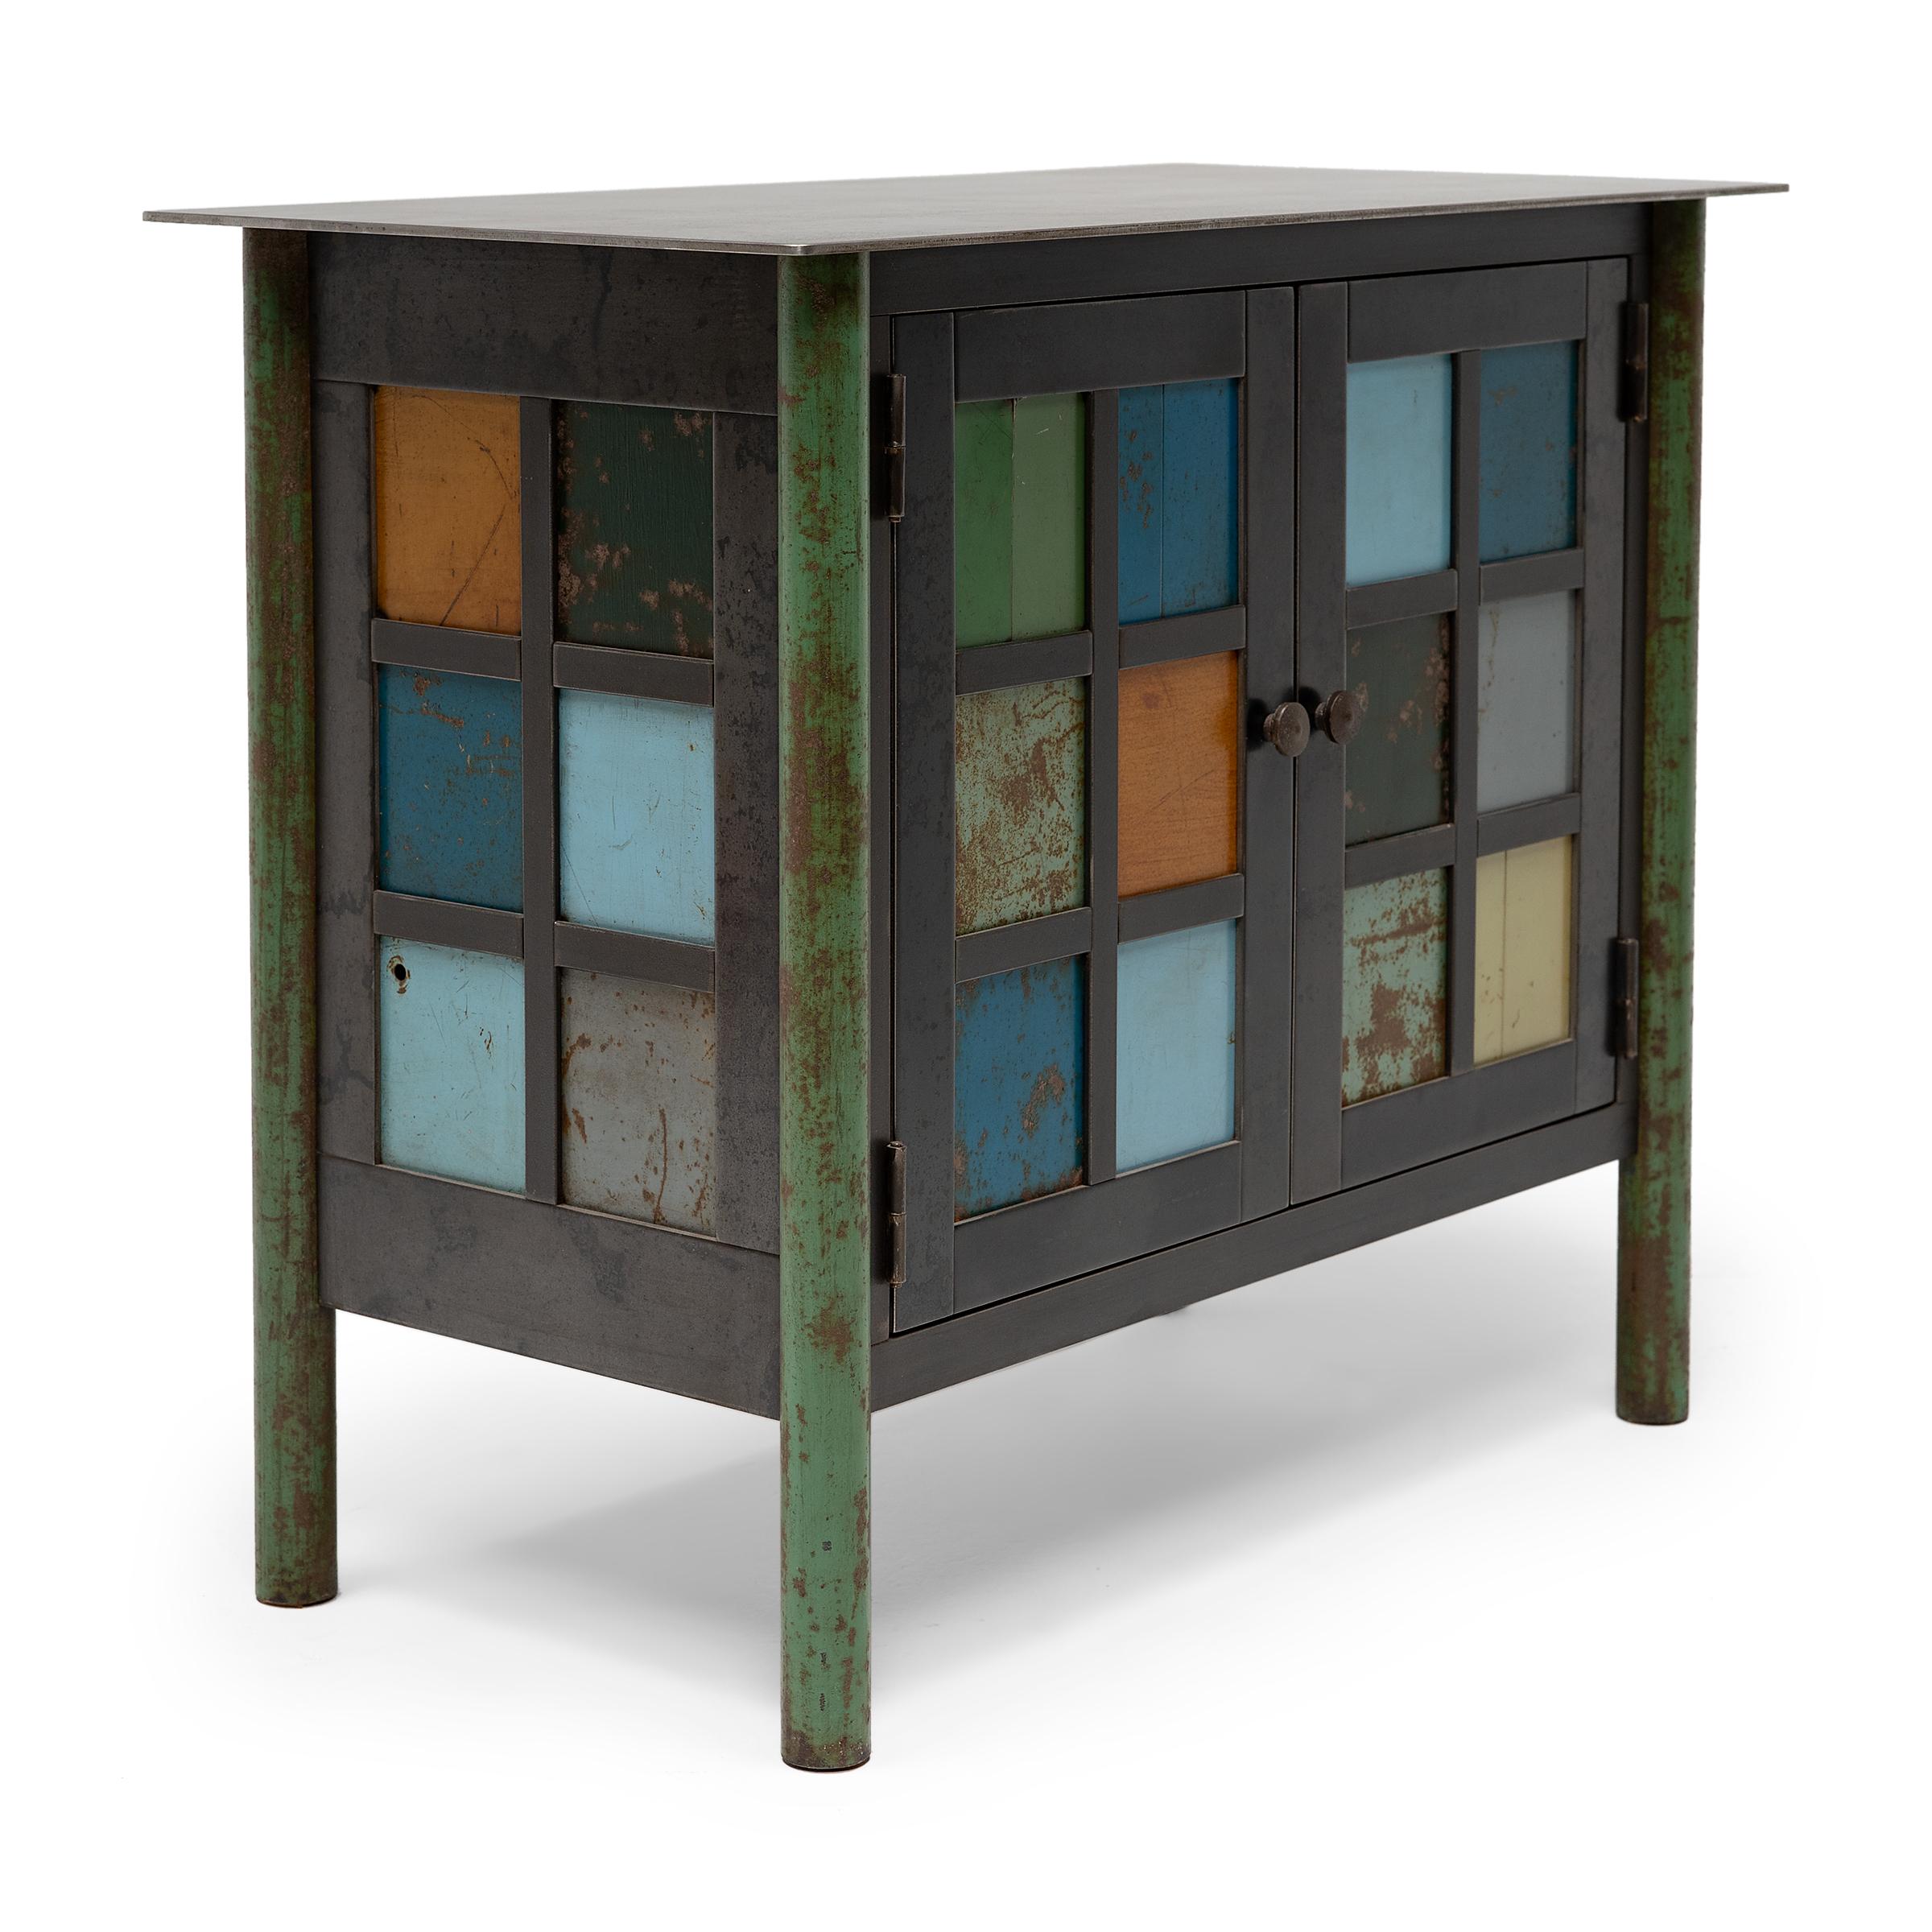 This steel side cabinet by artist Jim Rose exemplifies industrial chic with timeless simplicity and handcrafted touch. Inspired by Shaker minimalism, the chest is crafted from found steel with a hot rolled steel frame and legs made from salvaged